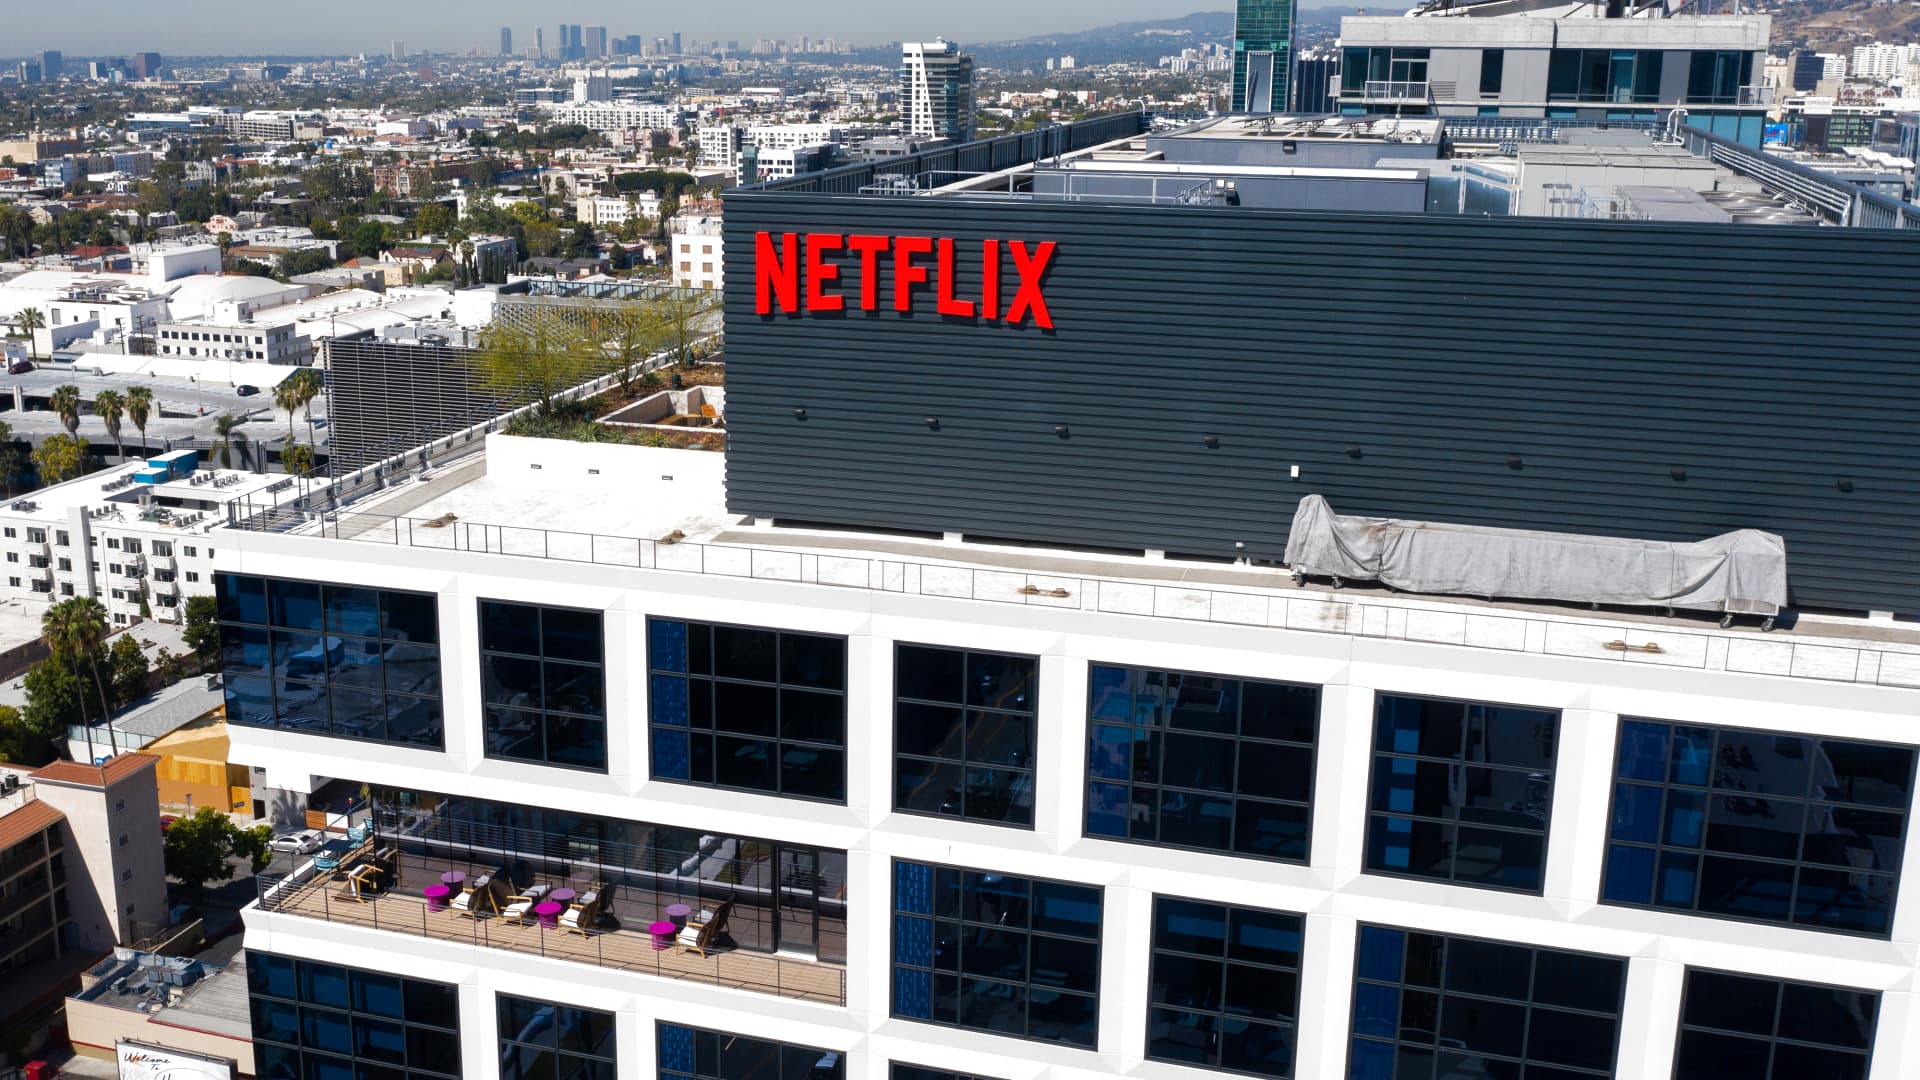 Signage outside the Netflix office building on Sunset Boulevard in Los Angeles, California, on Monday, April 19, 2021.